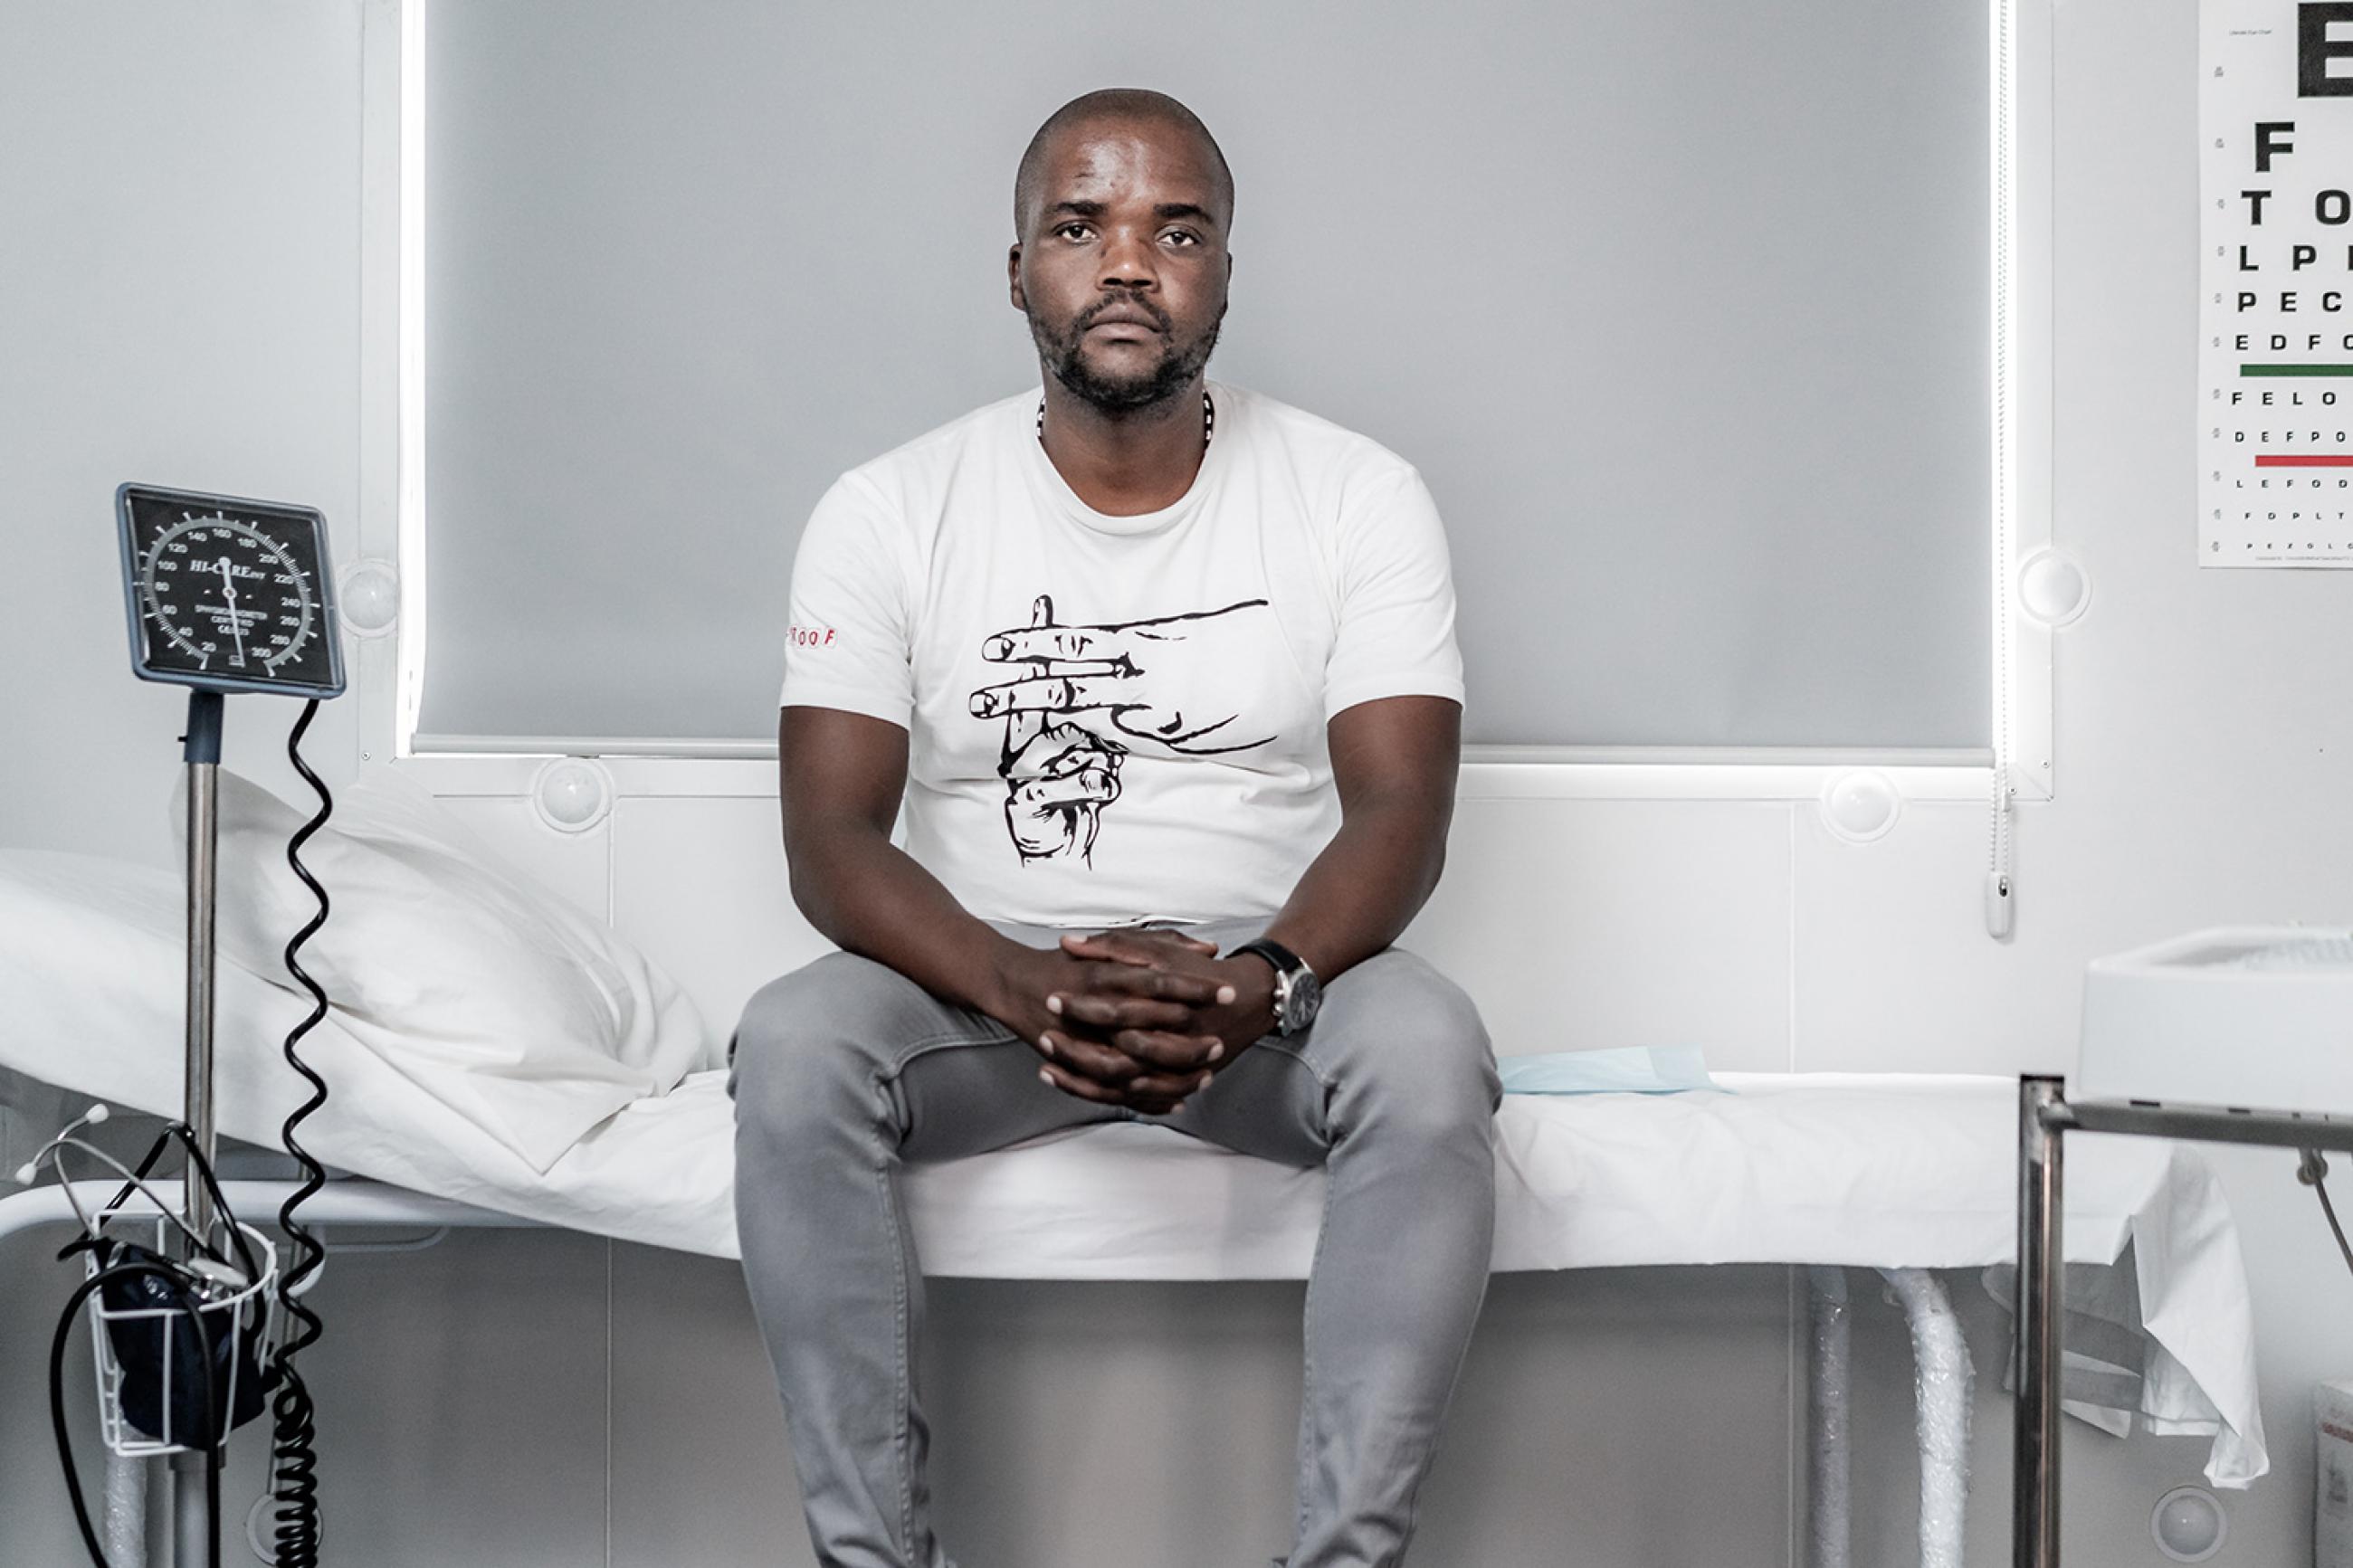 Goodman Makanda, who's involved in efforts to make tuberculosis and COVID-19 testing more acceptable and accessible for South African men, in Khayelitsha, Cape Town, South Africa, on March 24th 2019. The photo shows a man sitting in a clinic with various monitors and equipment. An eye exam is visible on the wall. MSF/Jelle Krings